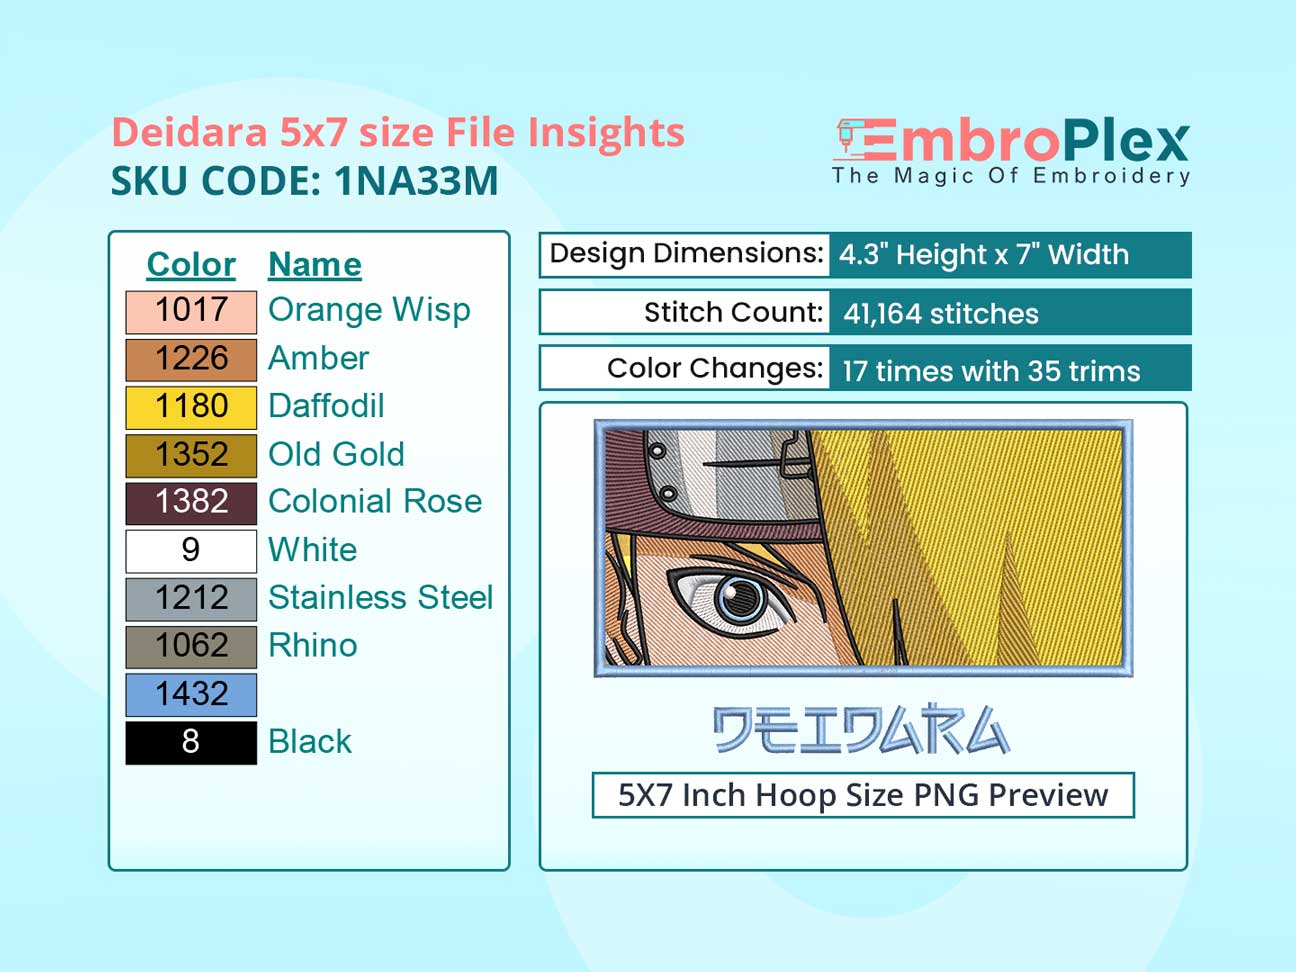 Anime-Inspired Deidara Embroidery Design File - 5x7 Inch hoop Size Variation overview image